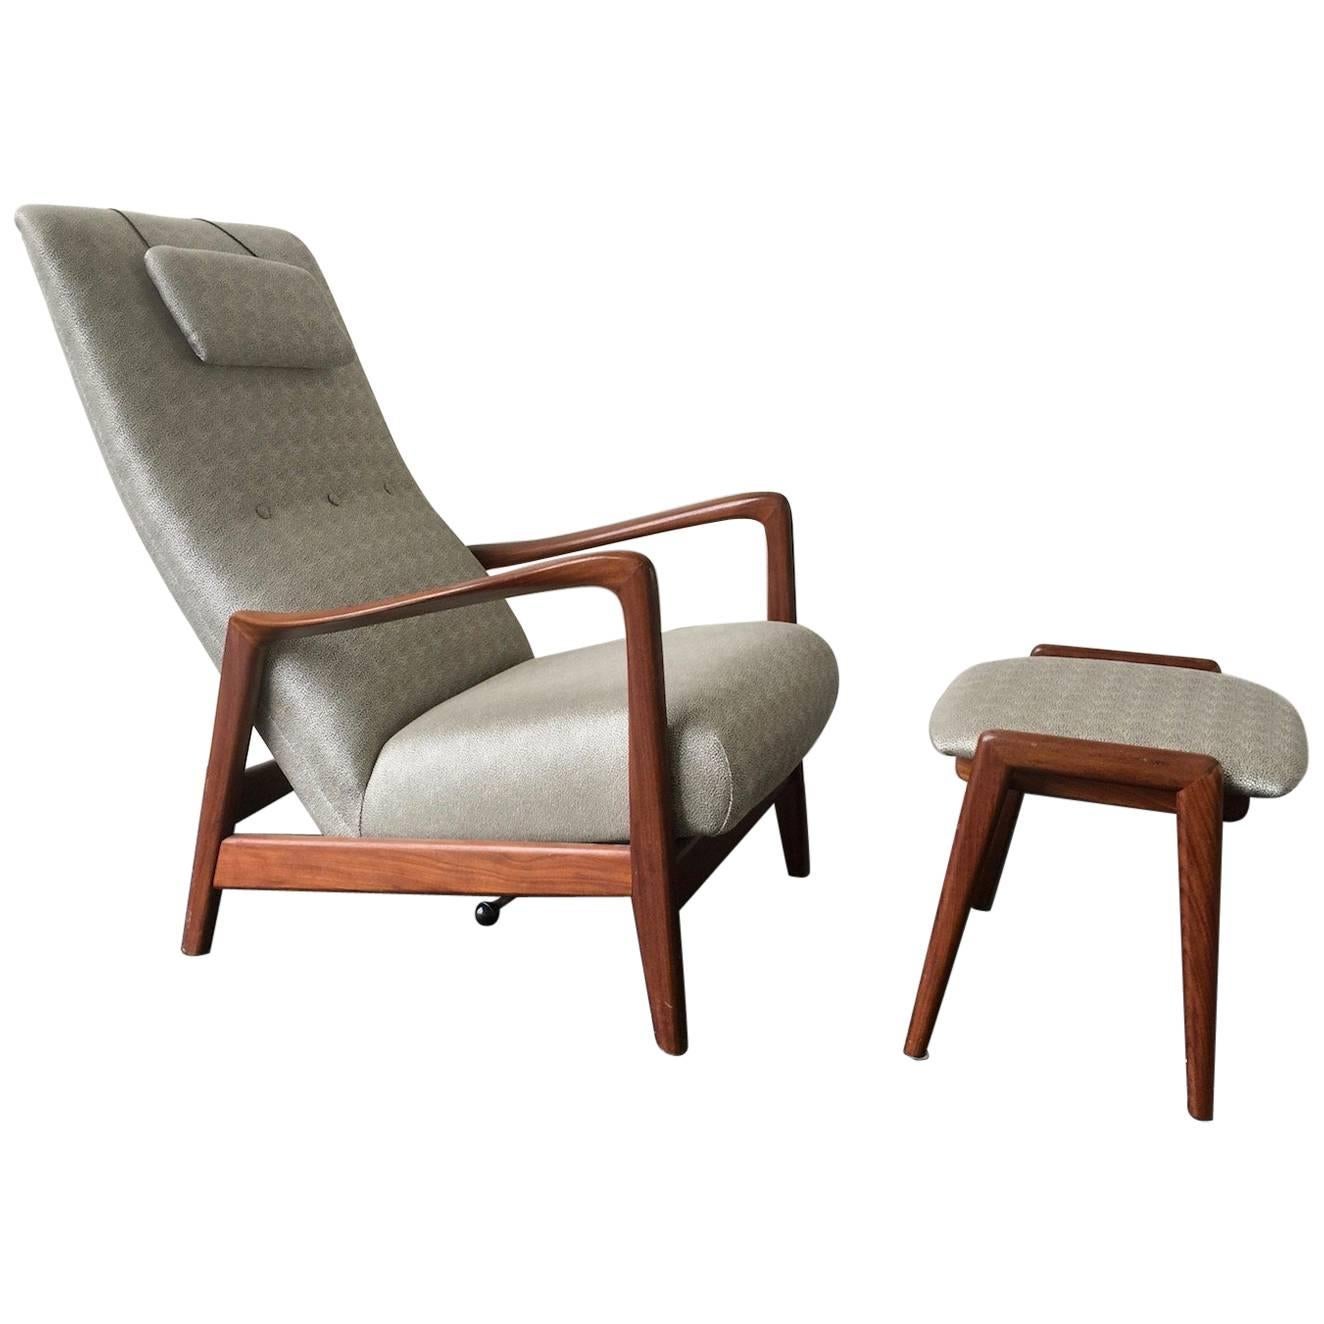 Gio Ponti for Cassina Lounge Chair and Stool No. 829